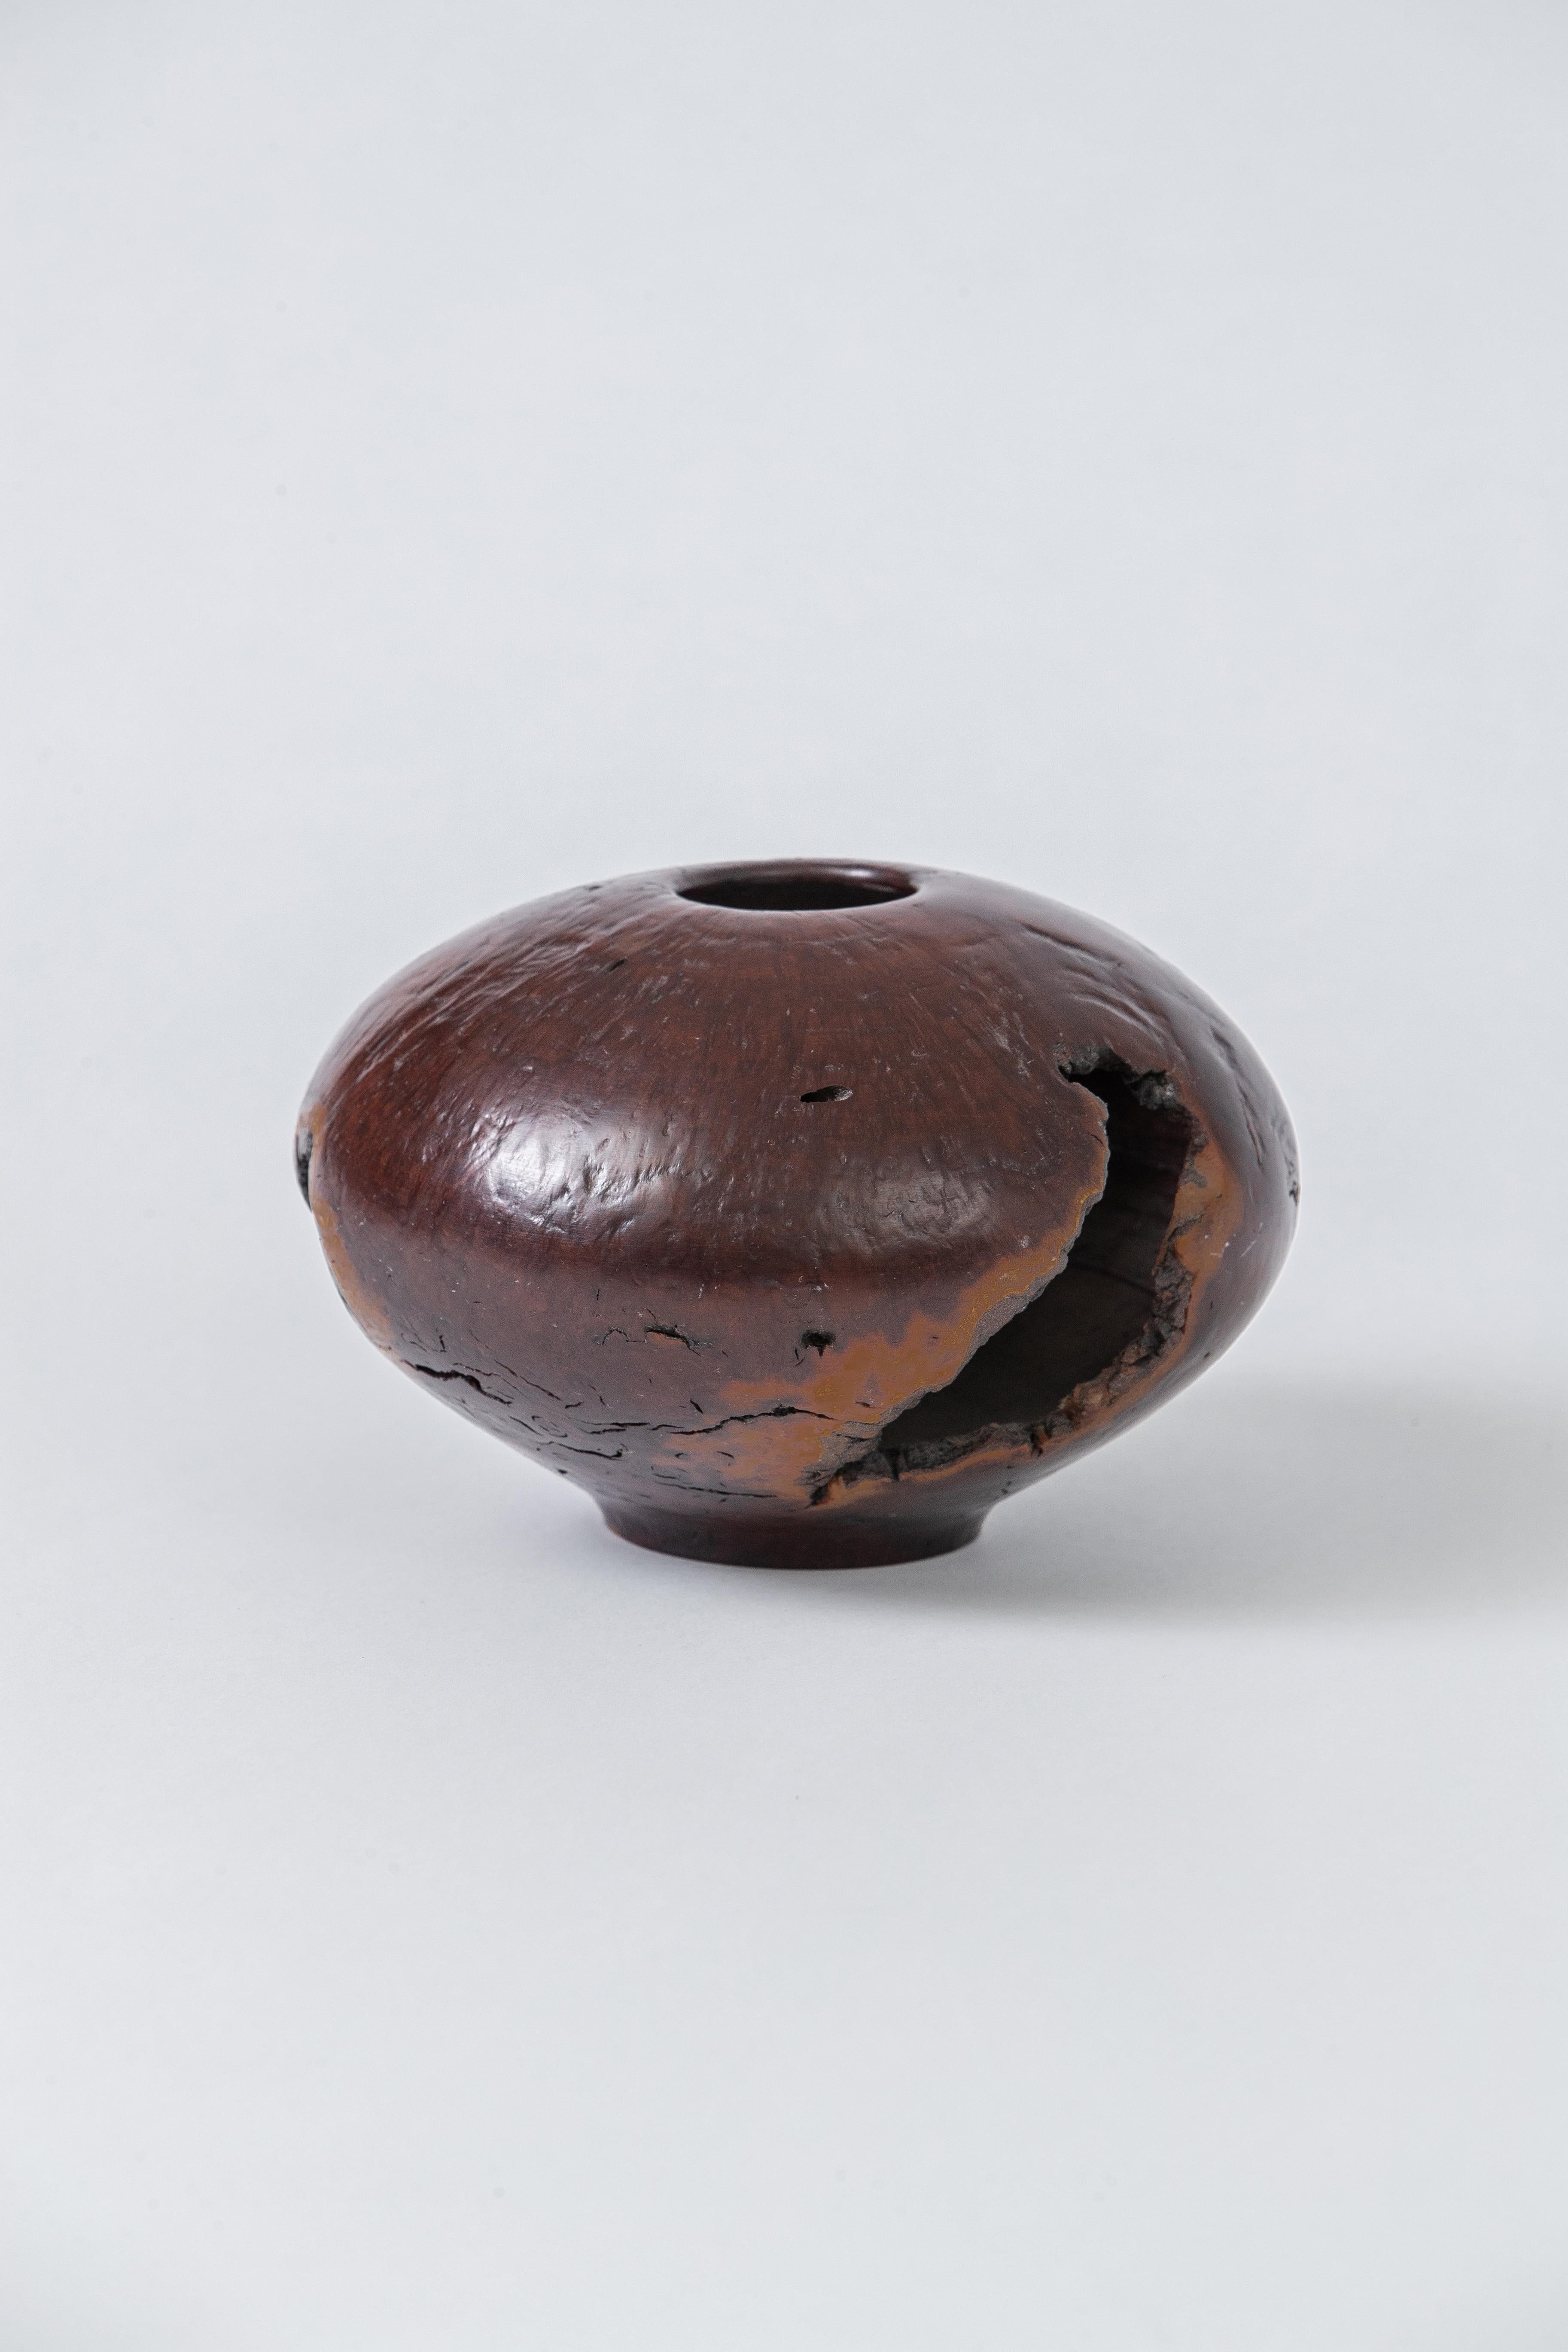 A vase in turned burl, the artist, used the material with its natural cavities to show the varied colors of the wood.